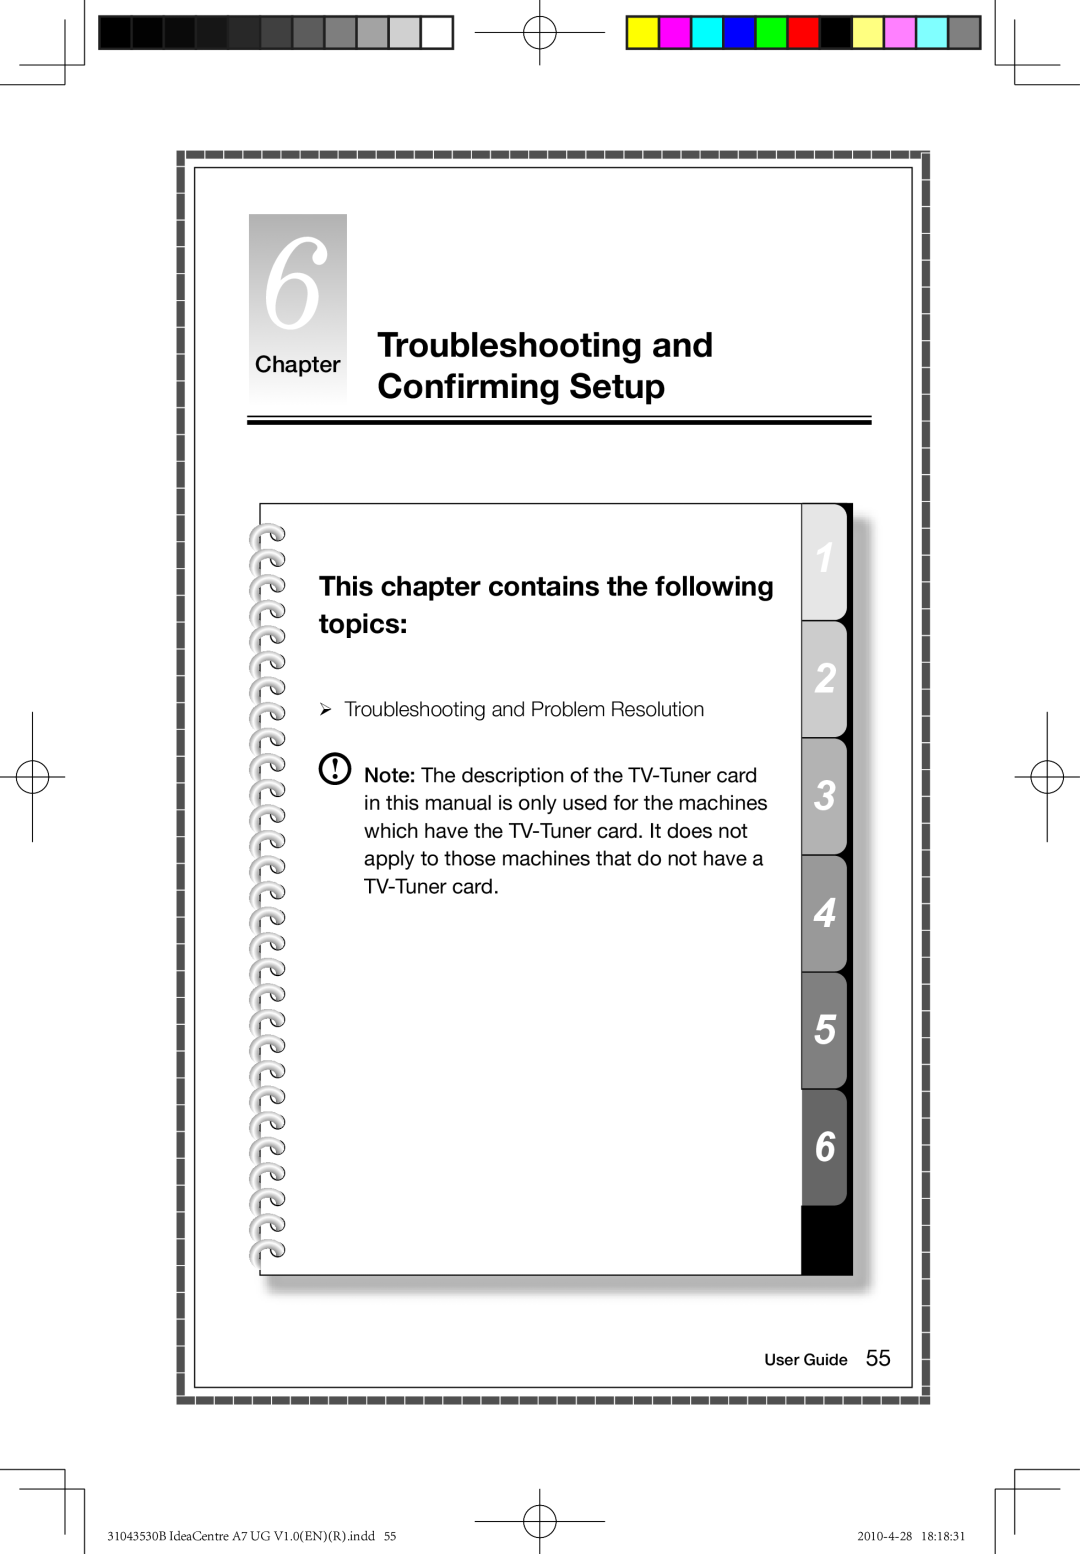 Lenovo A7 Chapter Troubleshooting and Confirming Setup, This chapter contains the following topics, User Guide, 2010-4-28 